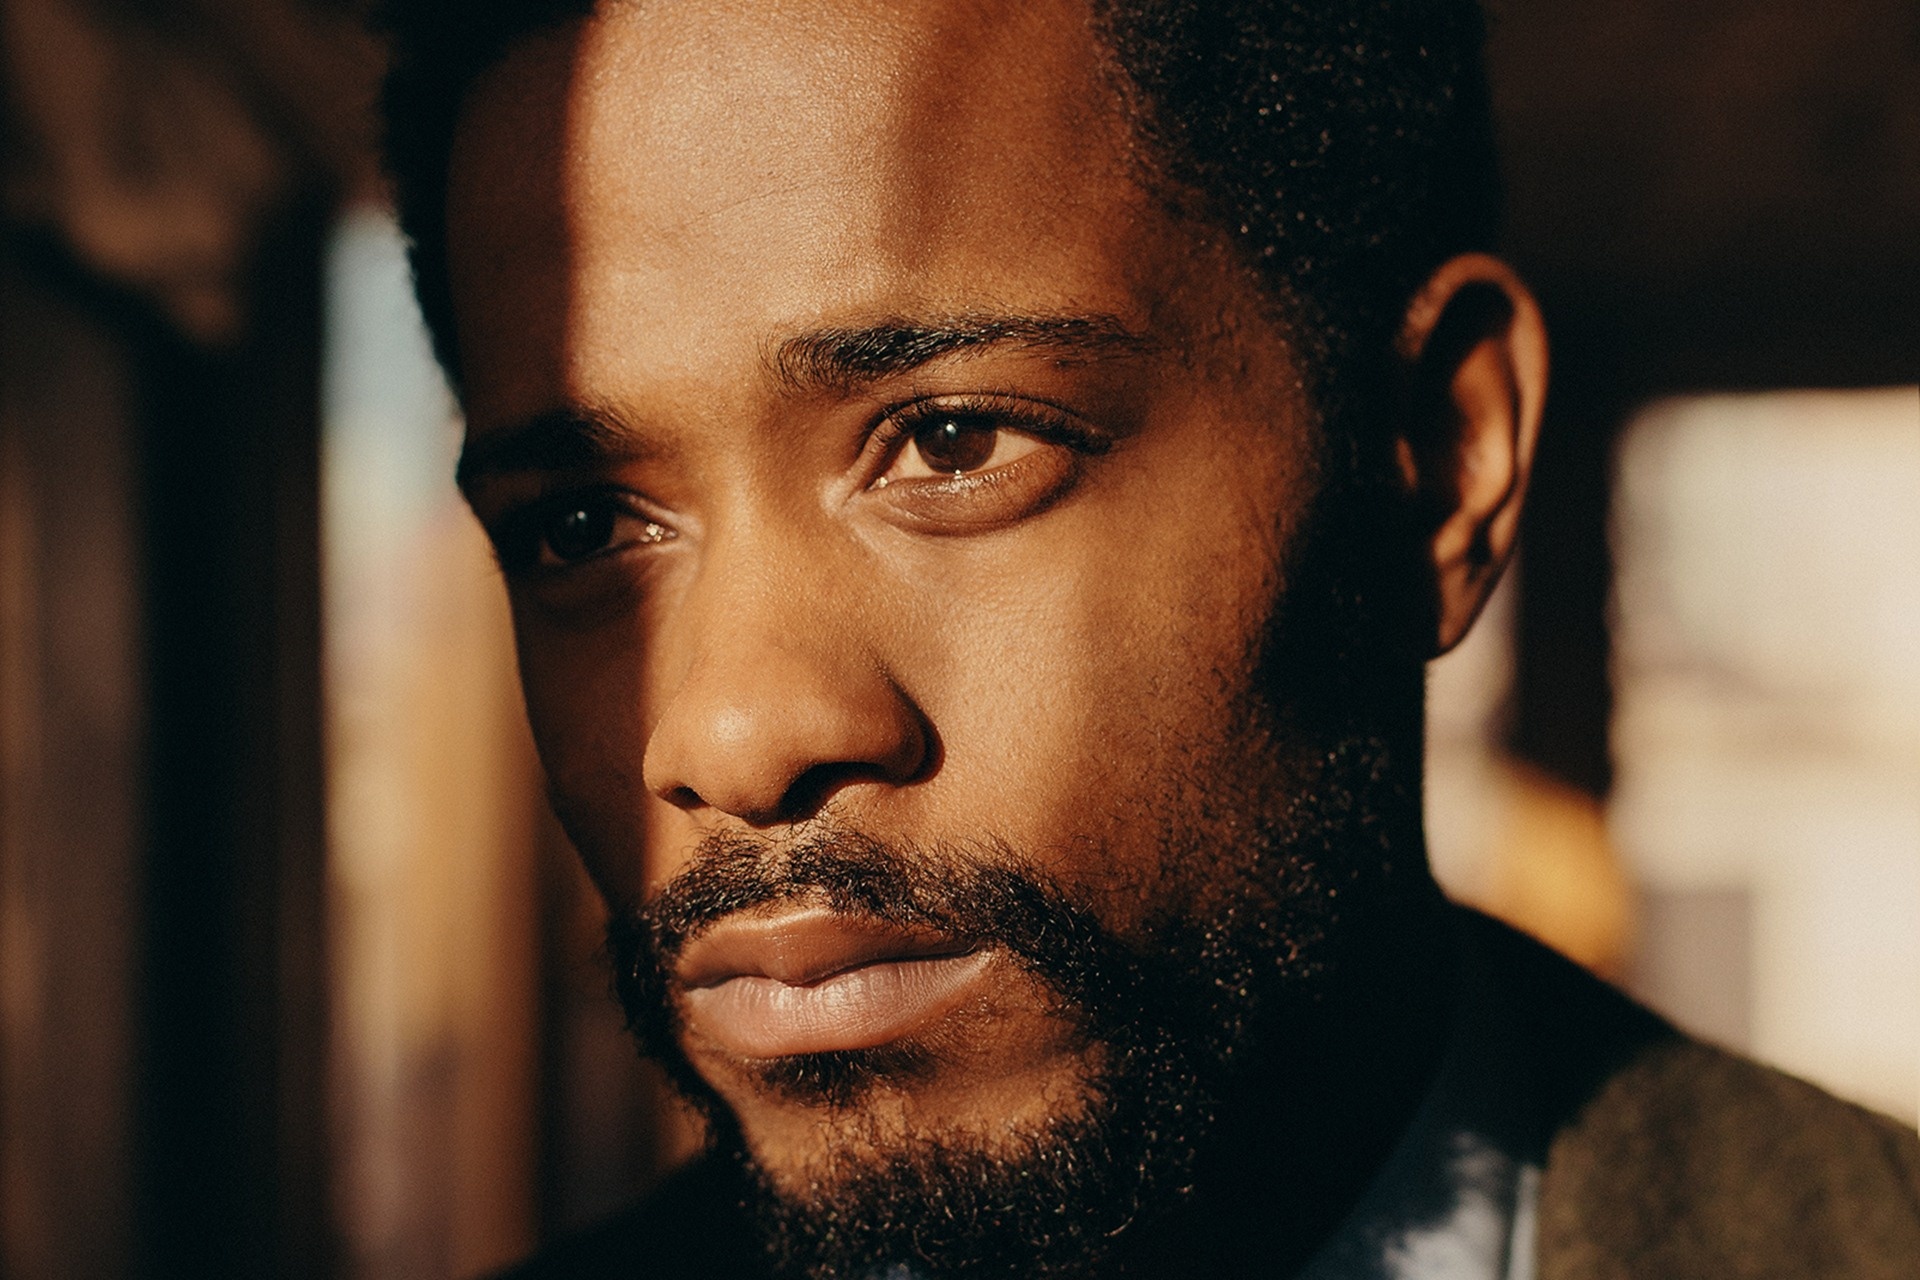 LaKeith Stanfield, HD wallpapers, High quality, 1920x1280 HD Desktop